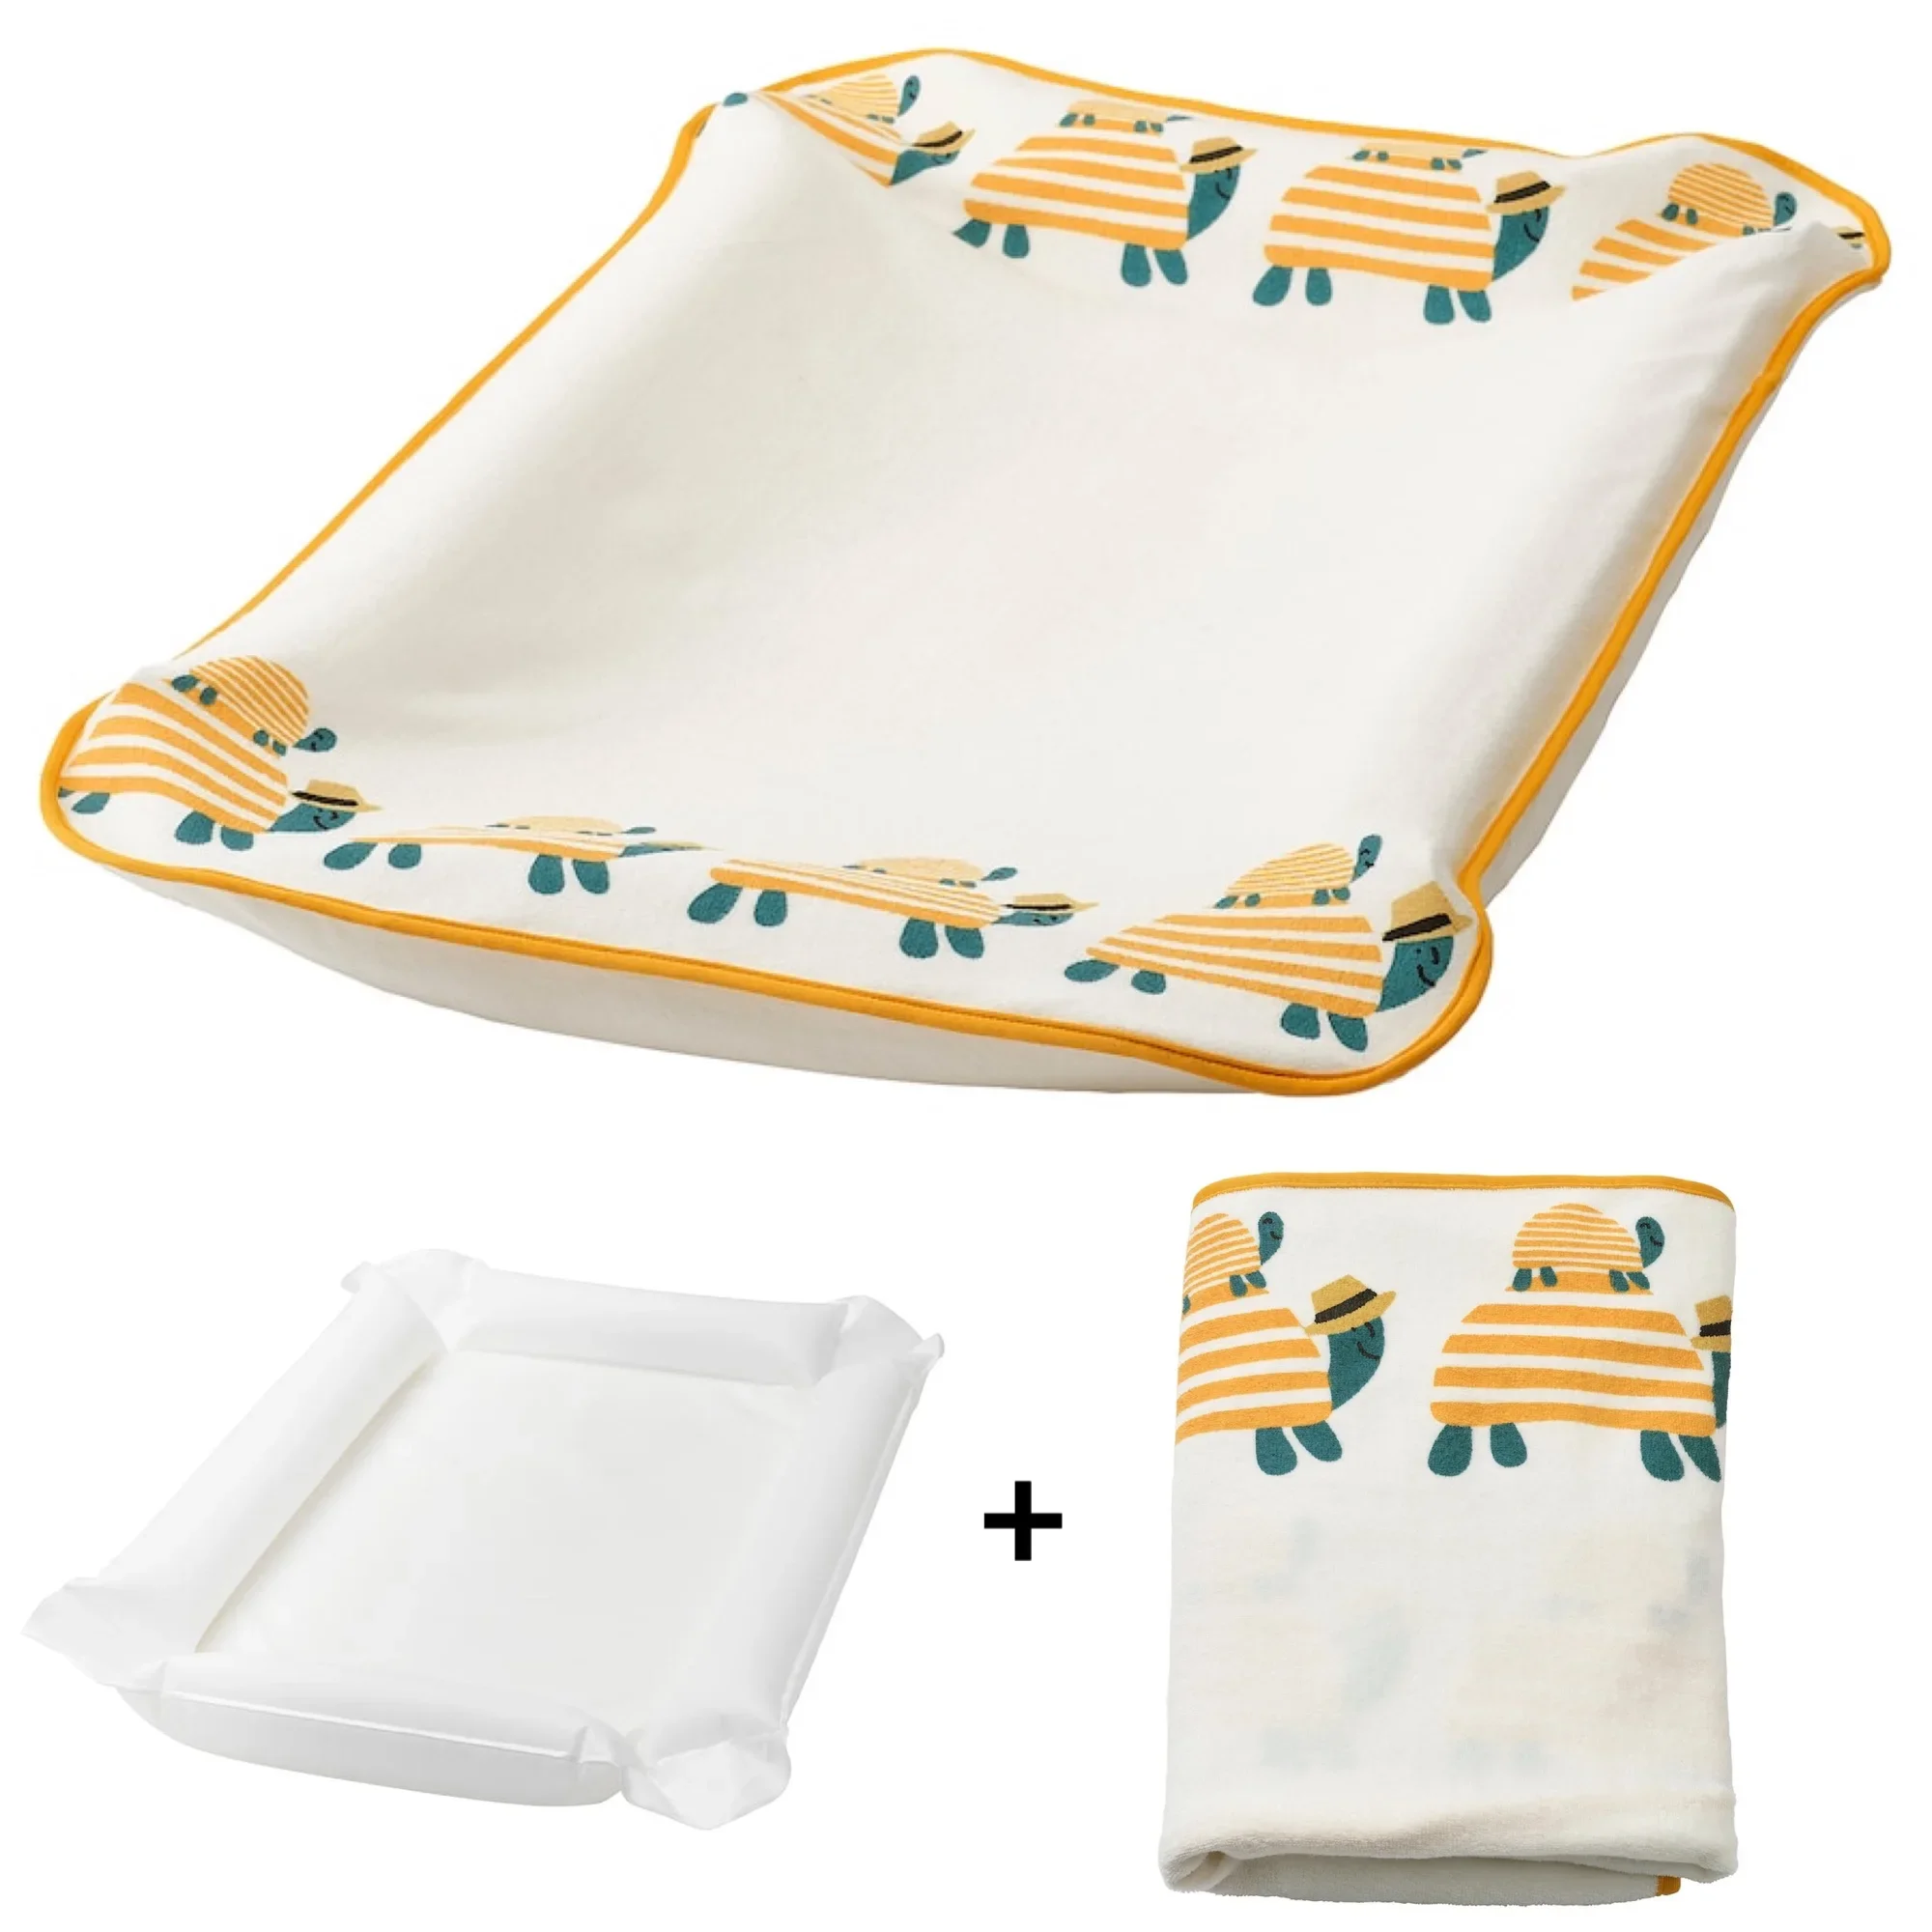 IKEA SKOTSAM Changing table Babycare mat / cover (2)